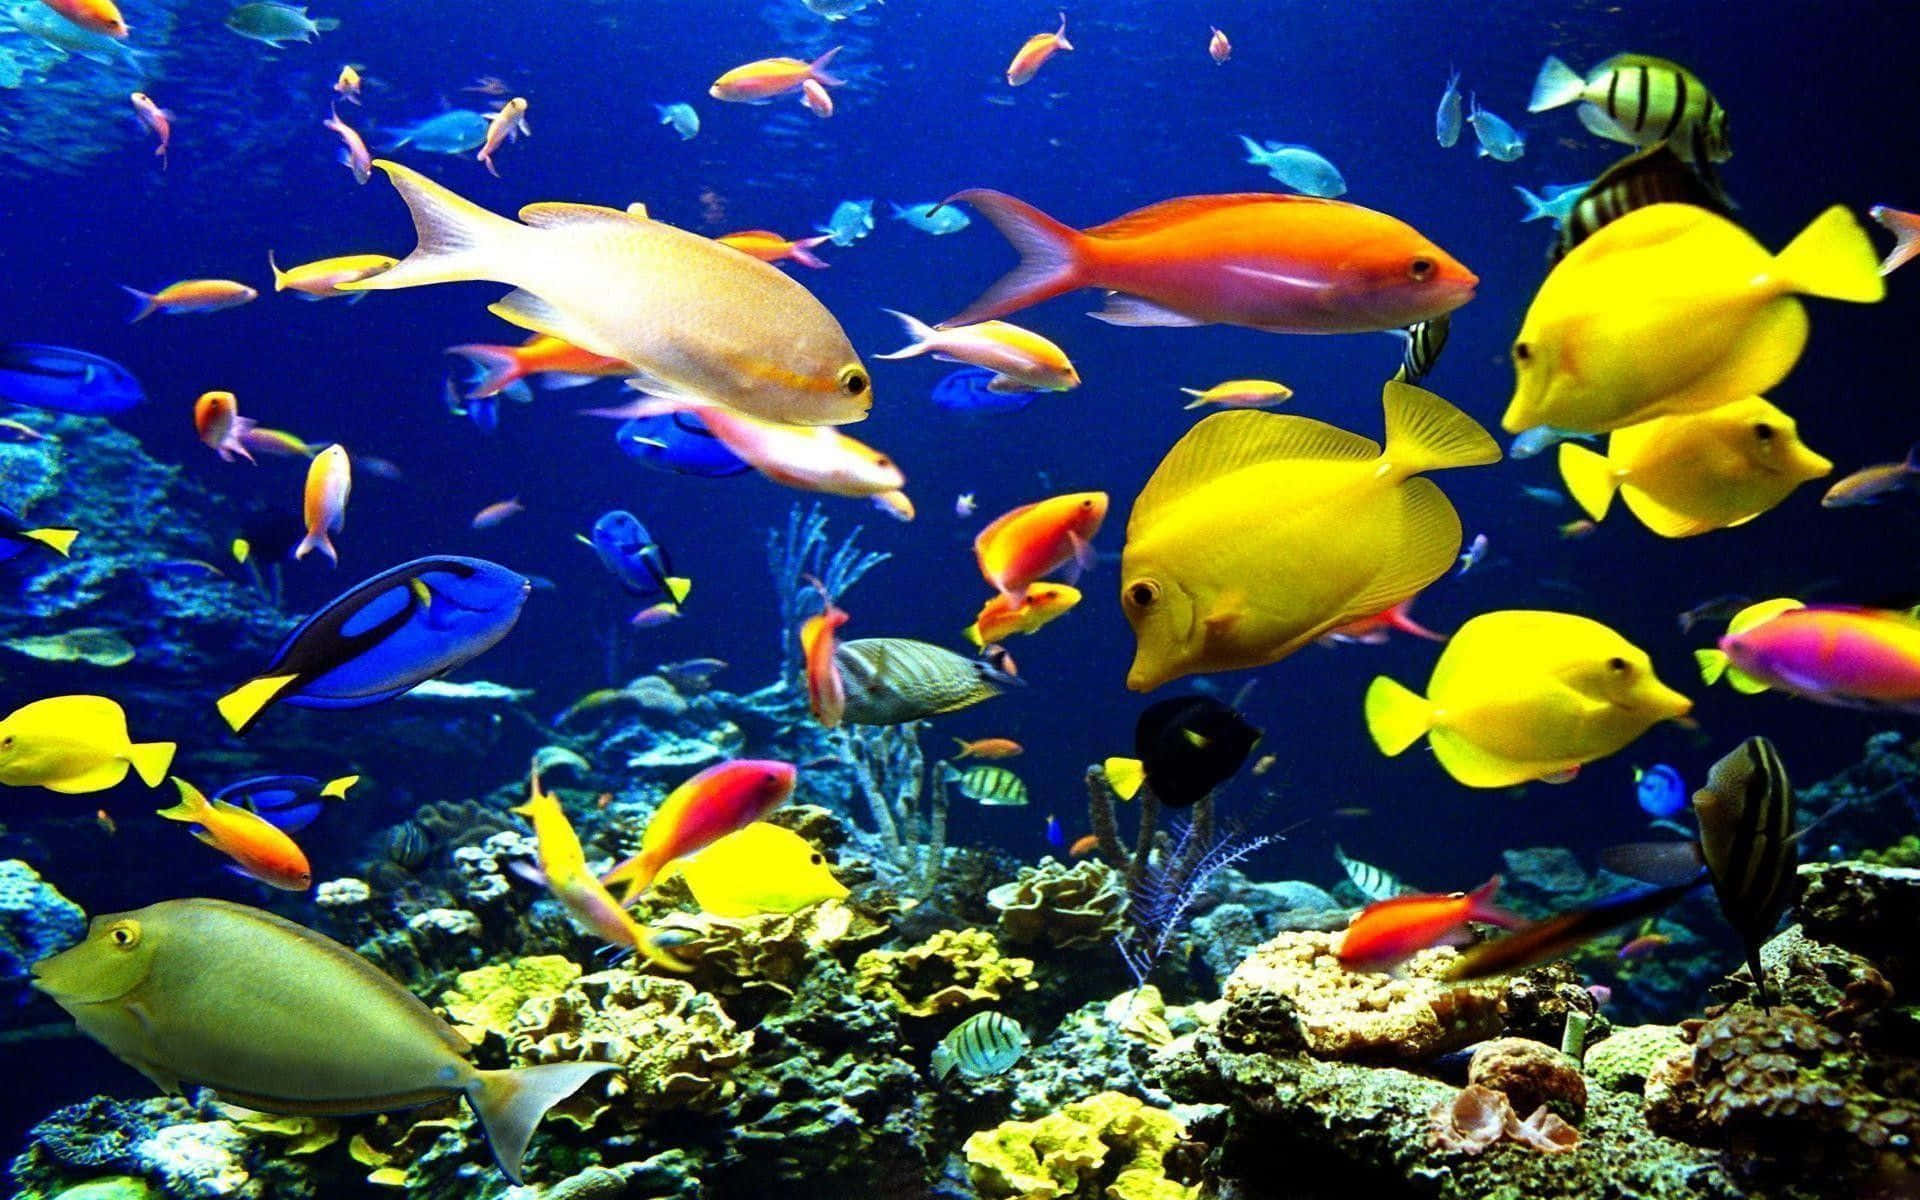 Swim in the World's Most Beautiful Oceans with HD Fish